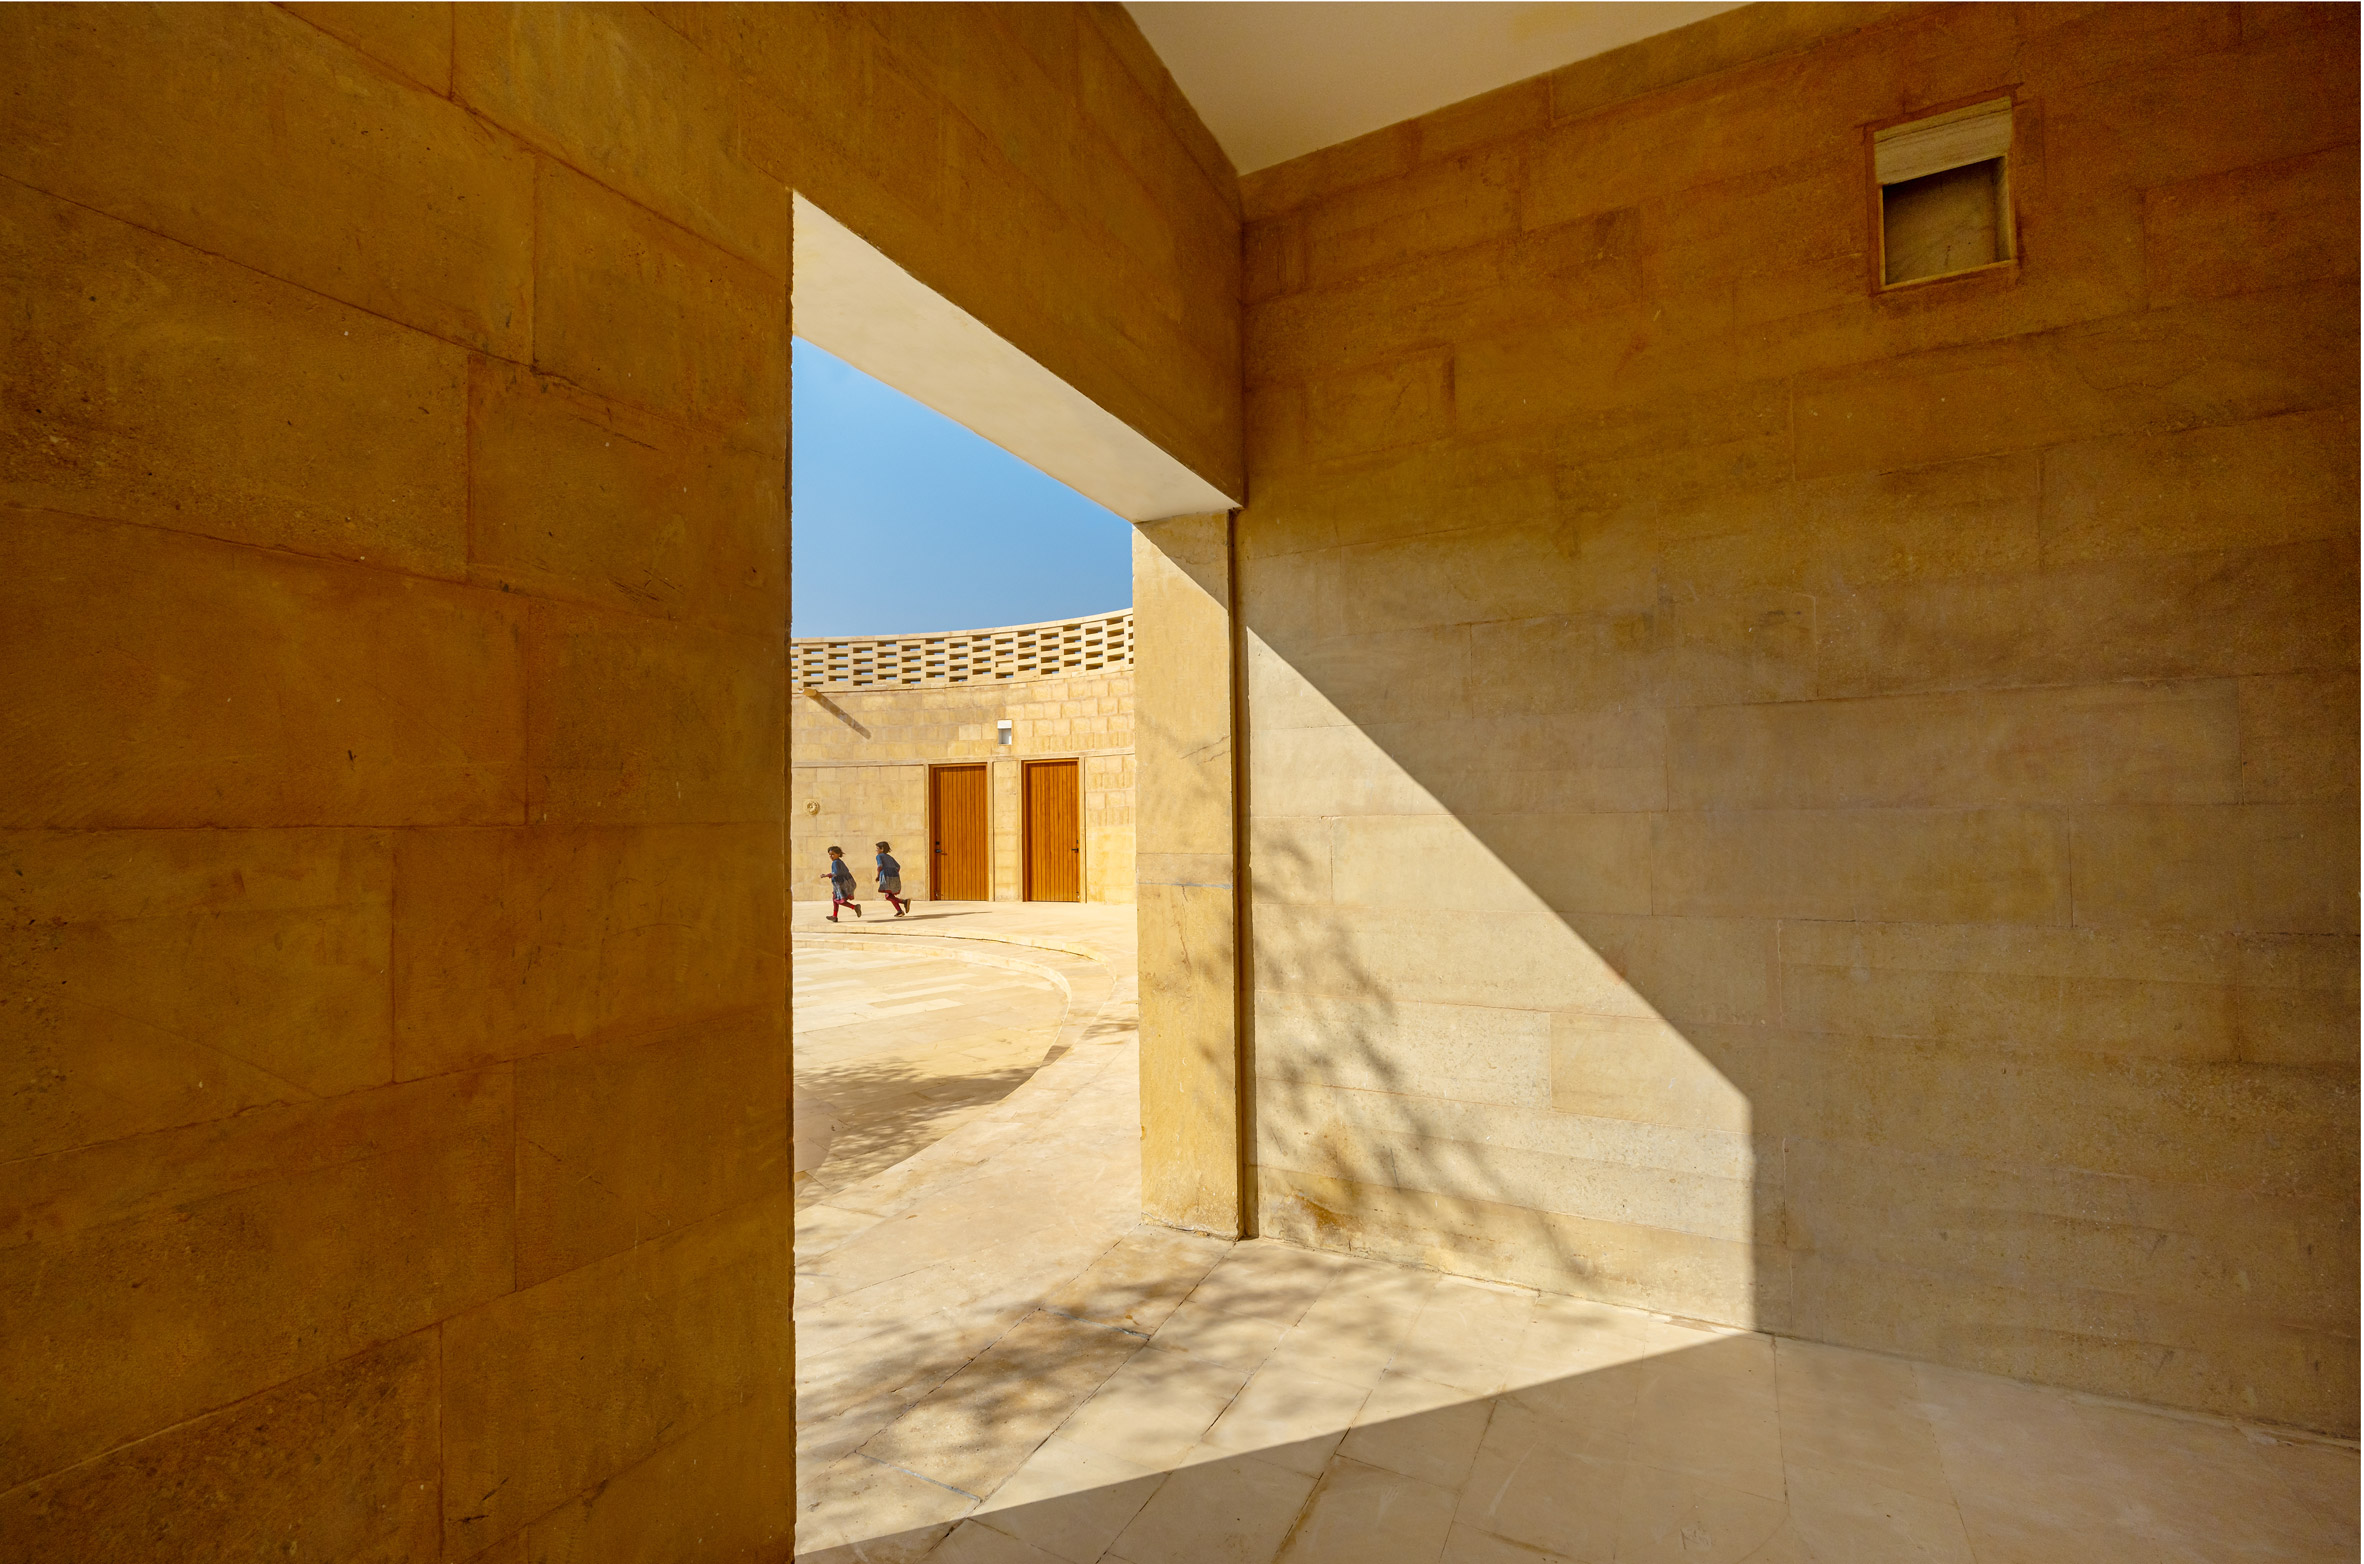 Sandstone was used across the walls and floors by Diana Kellogg Architects